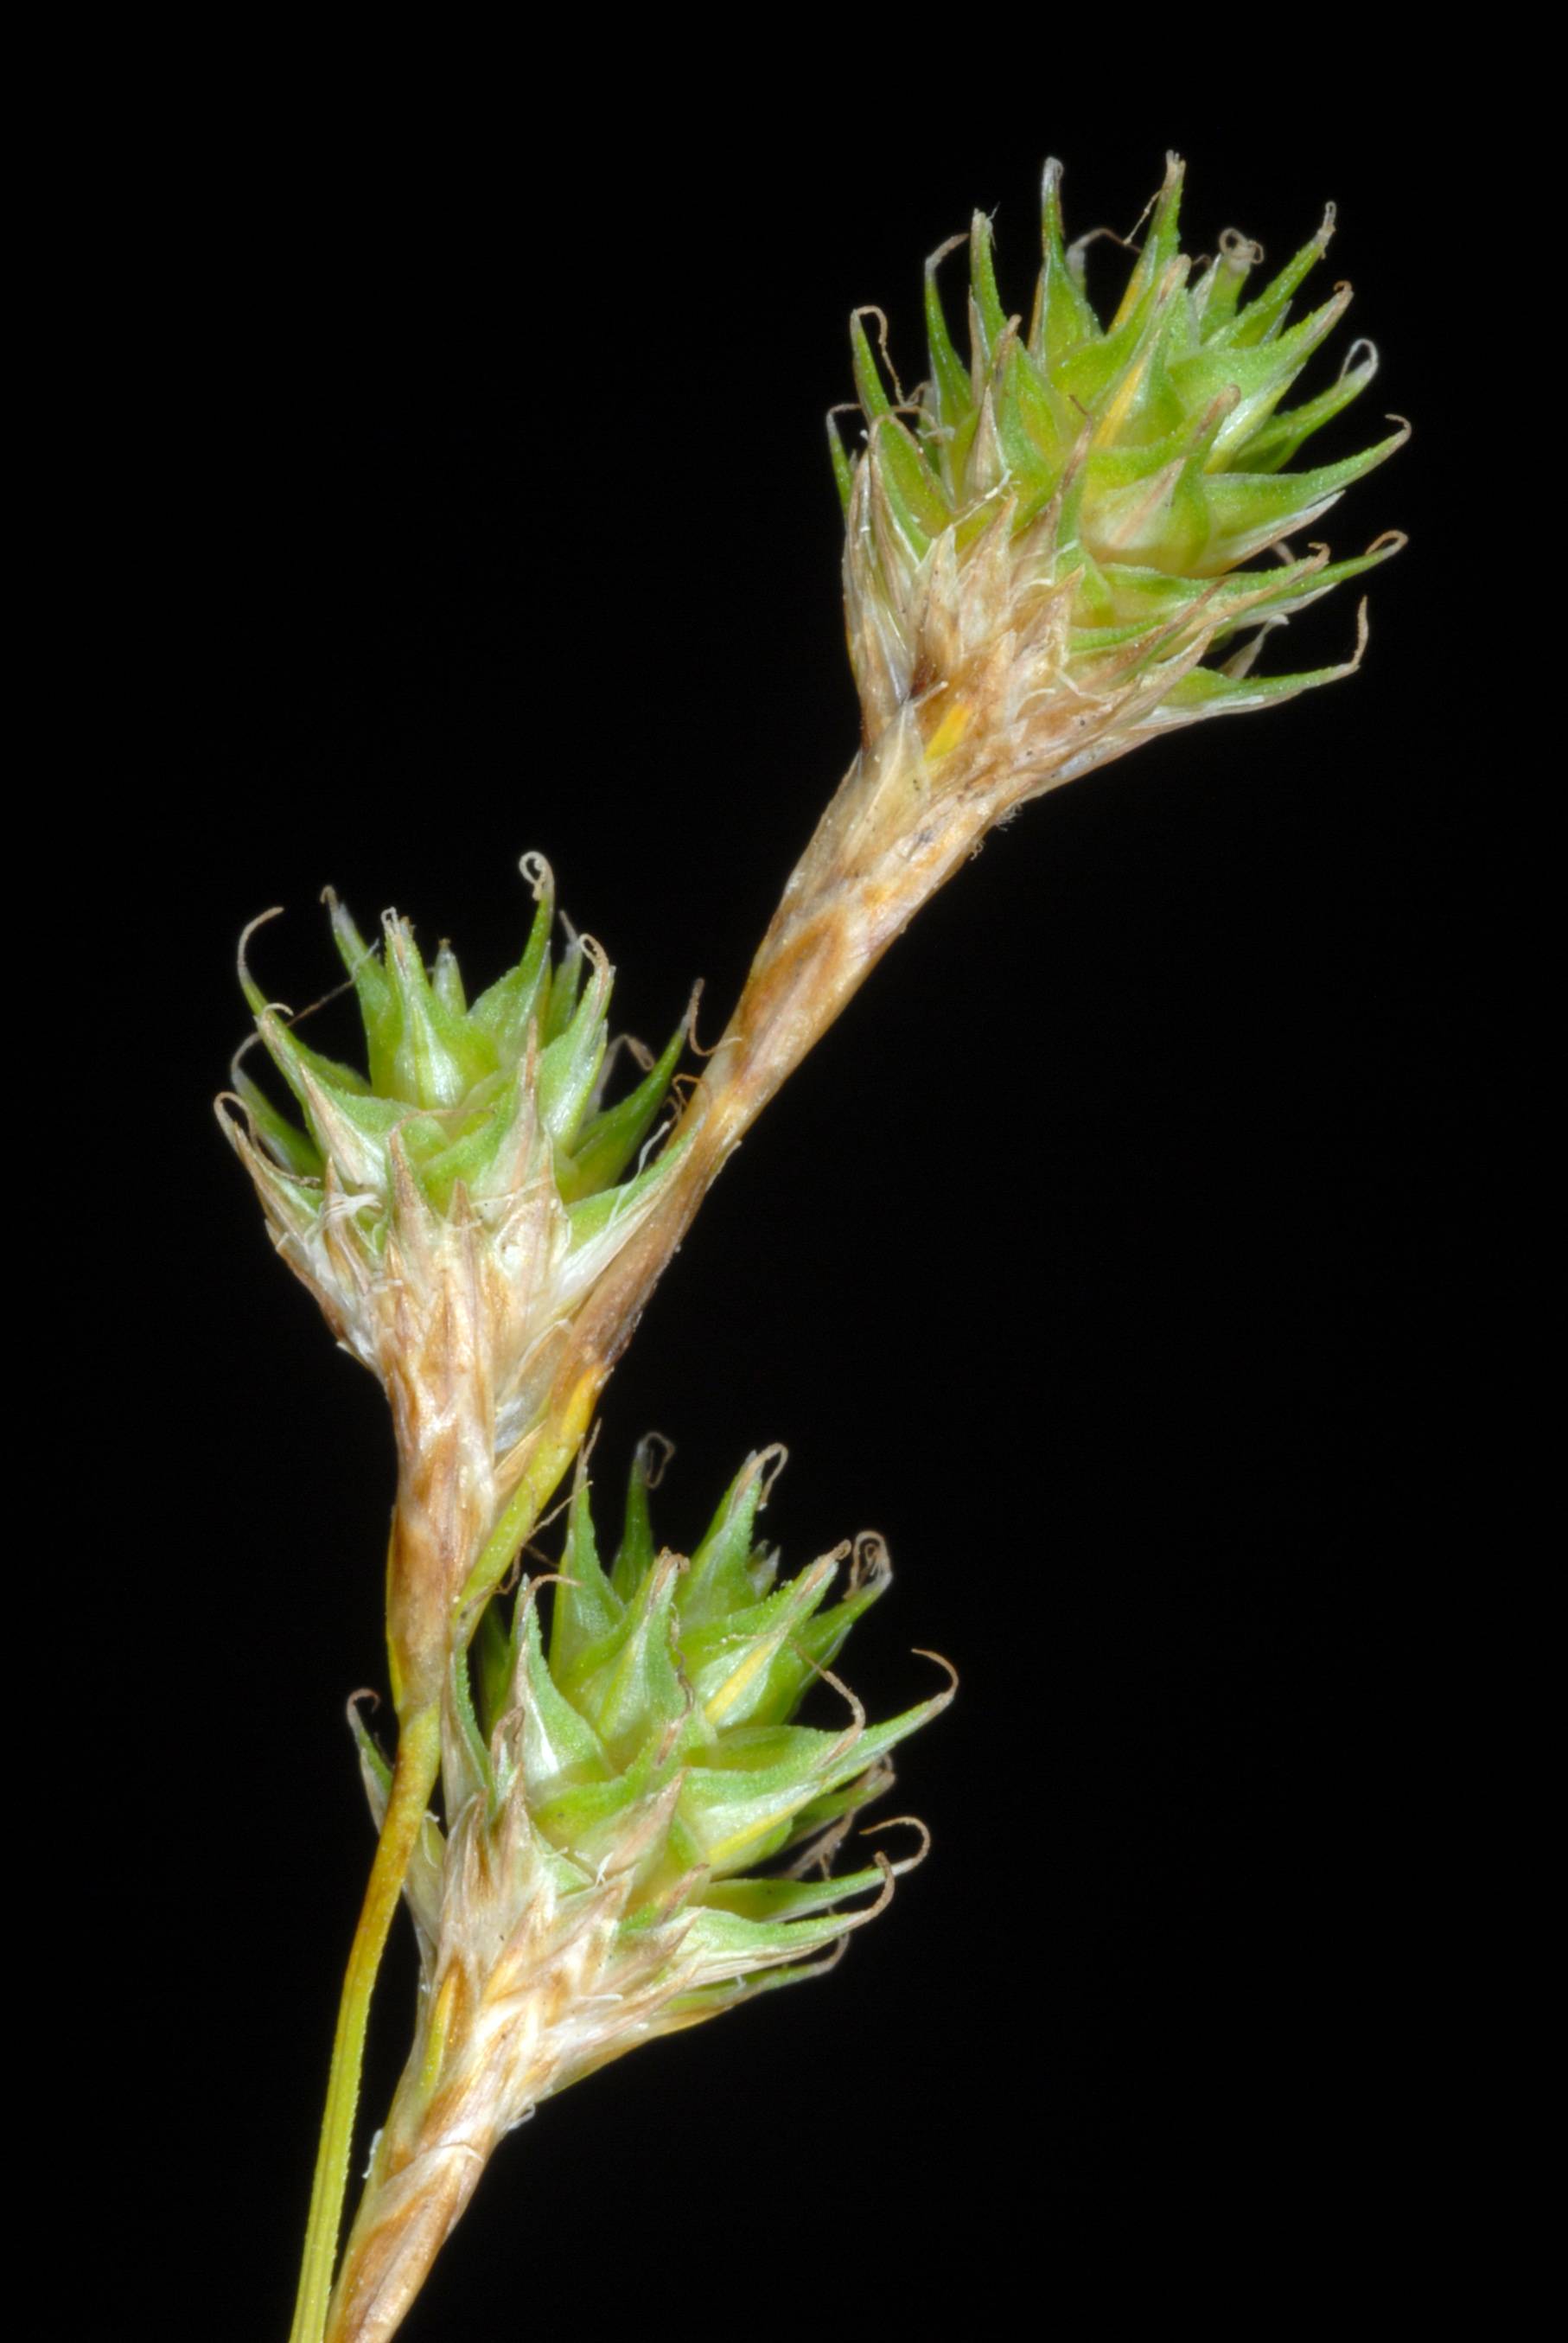 lime spikelets with brown-beige stems